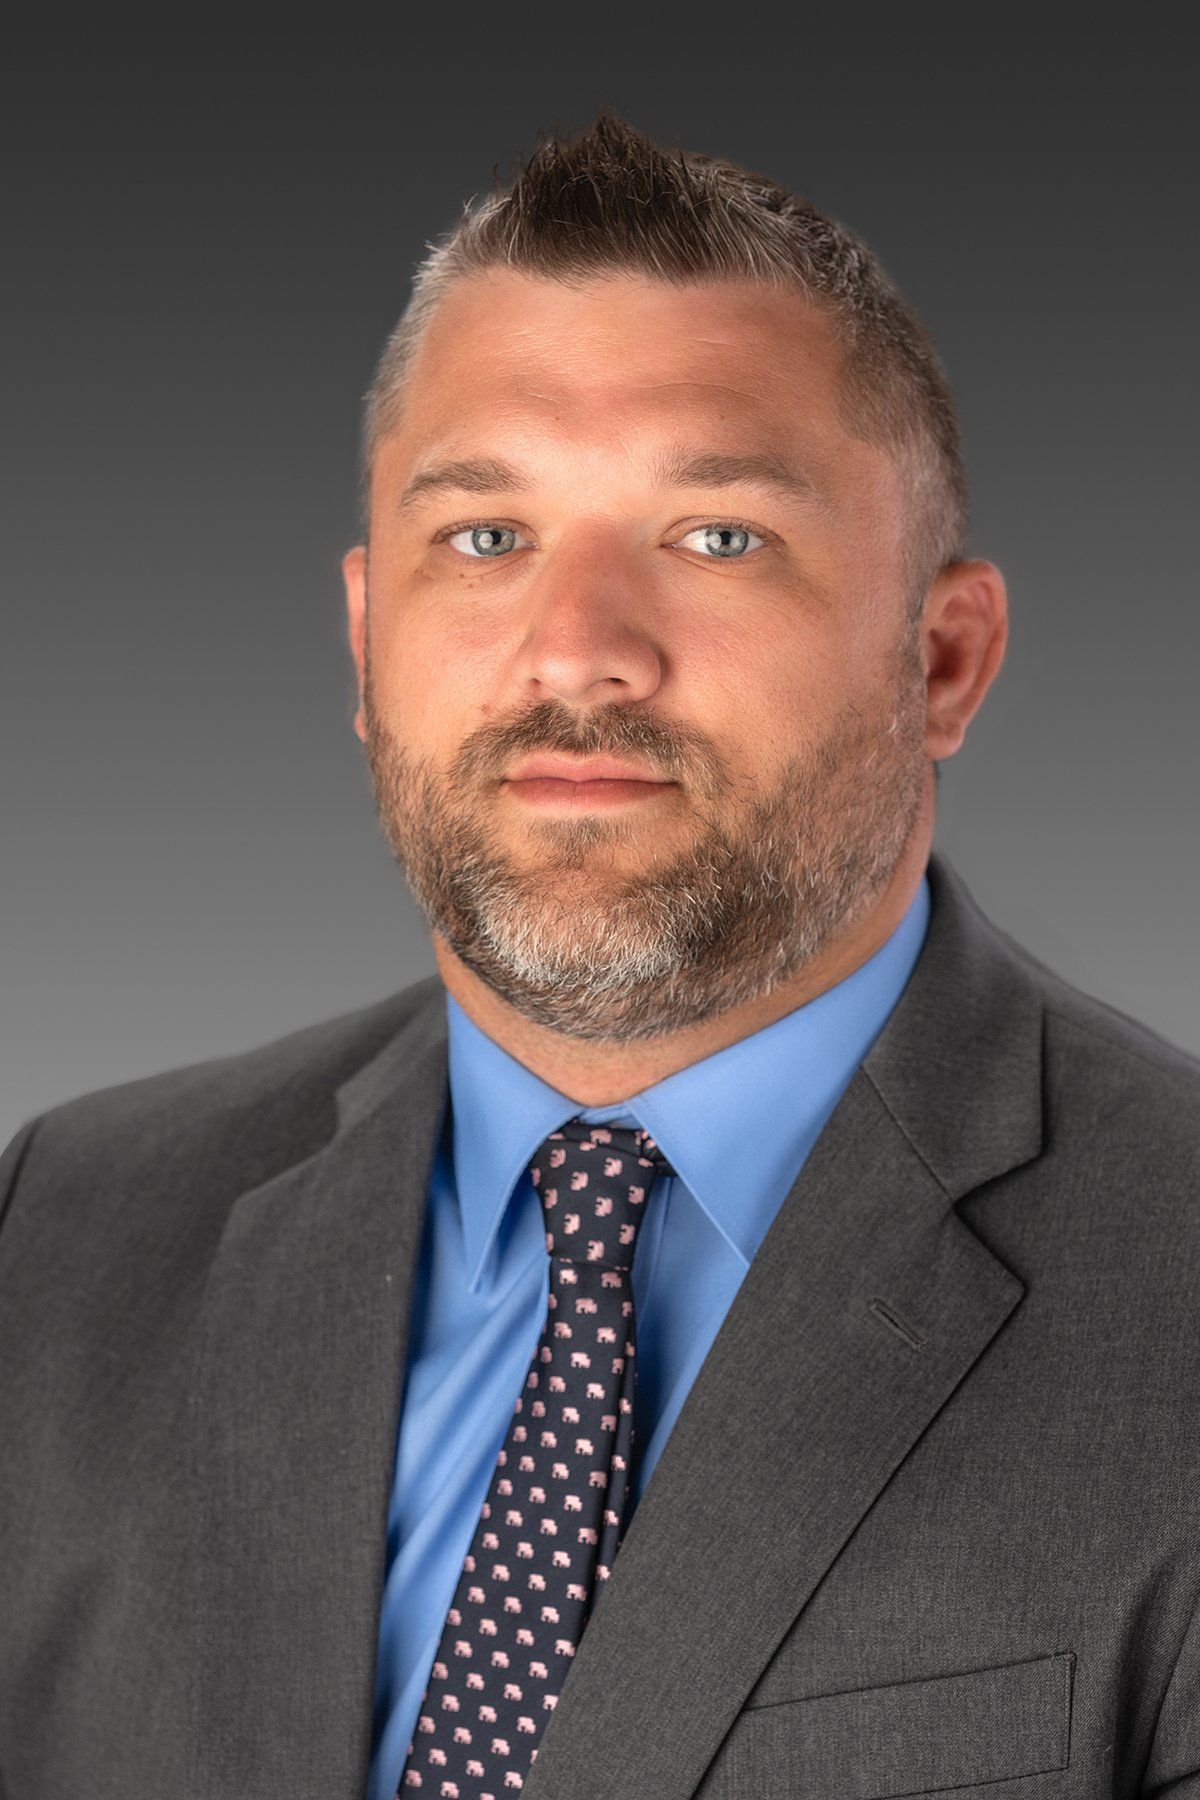 ﻿Christopher J. Stacey, CPA
